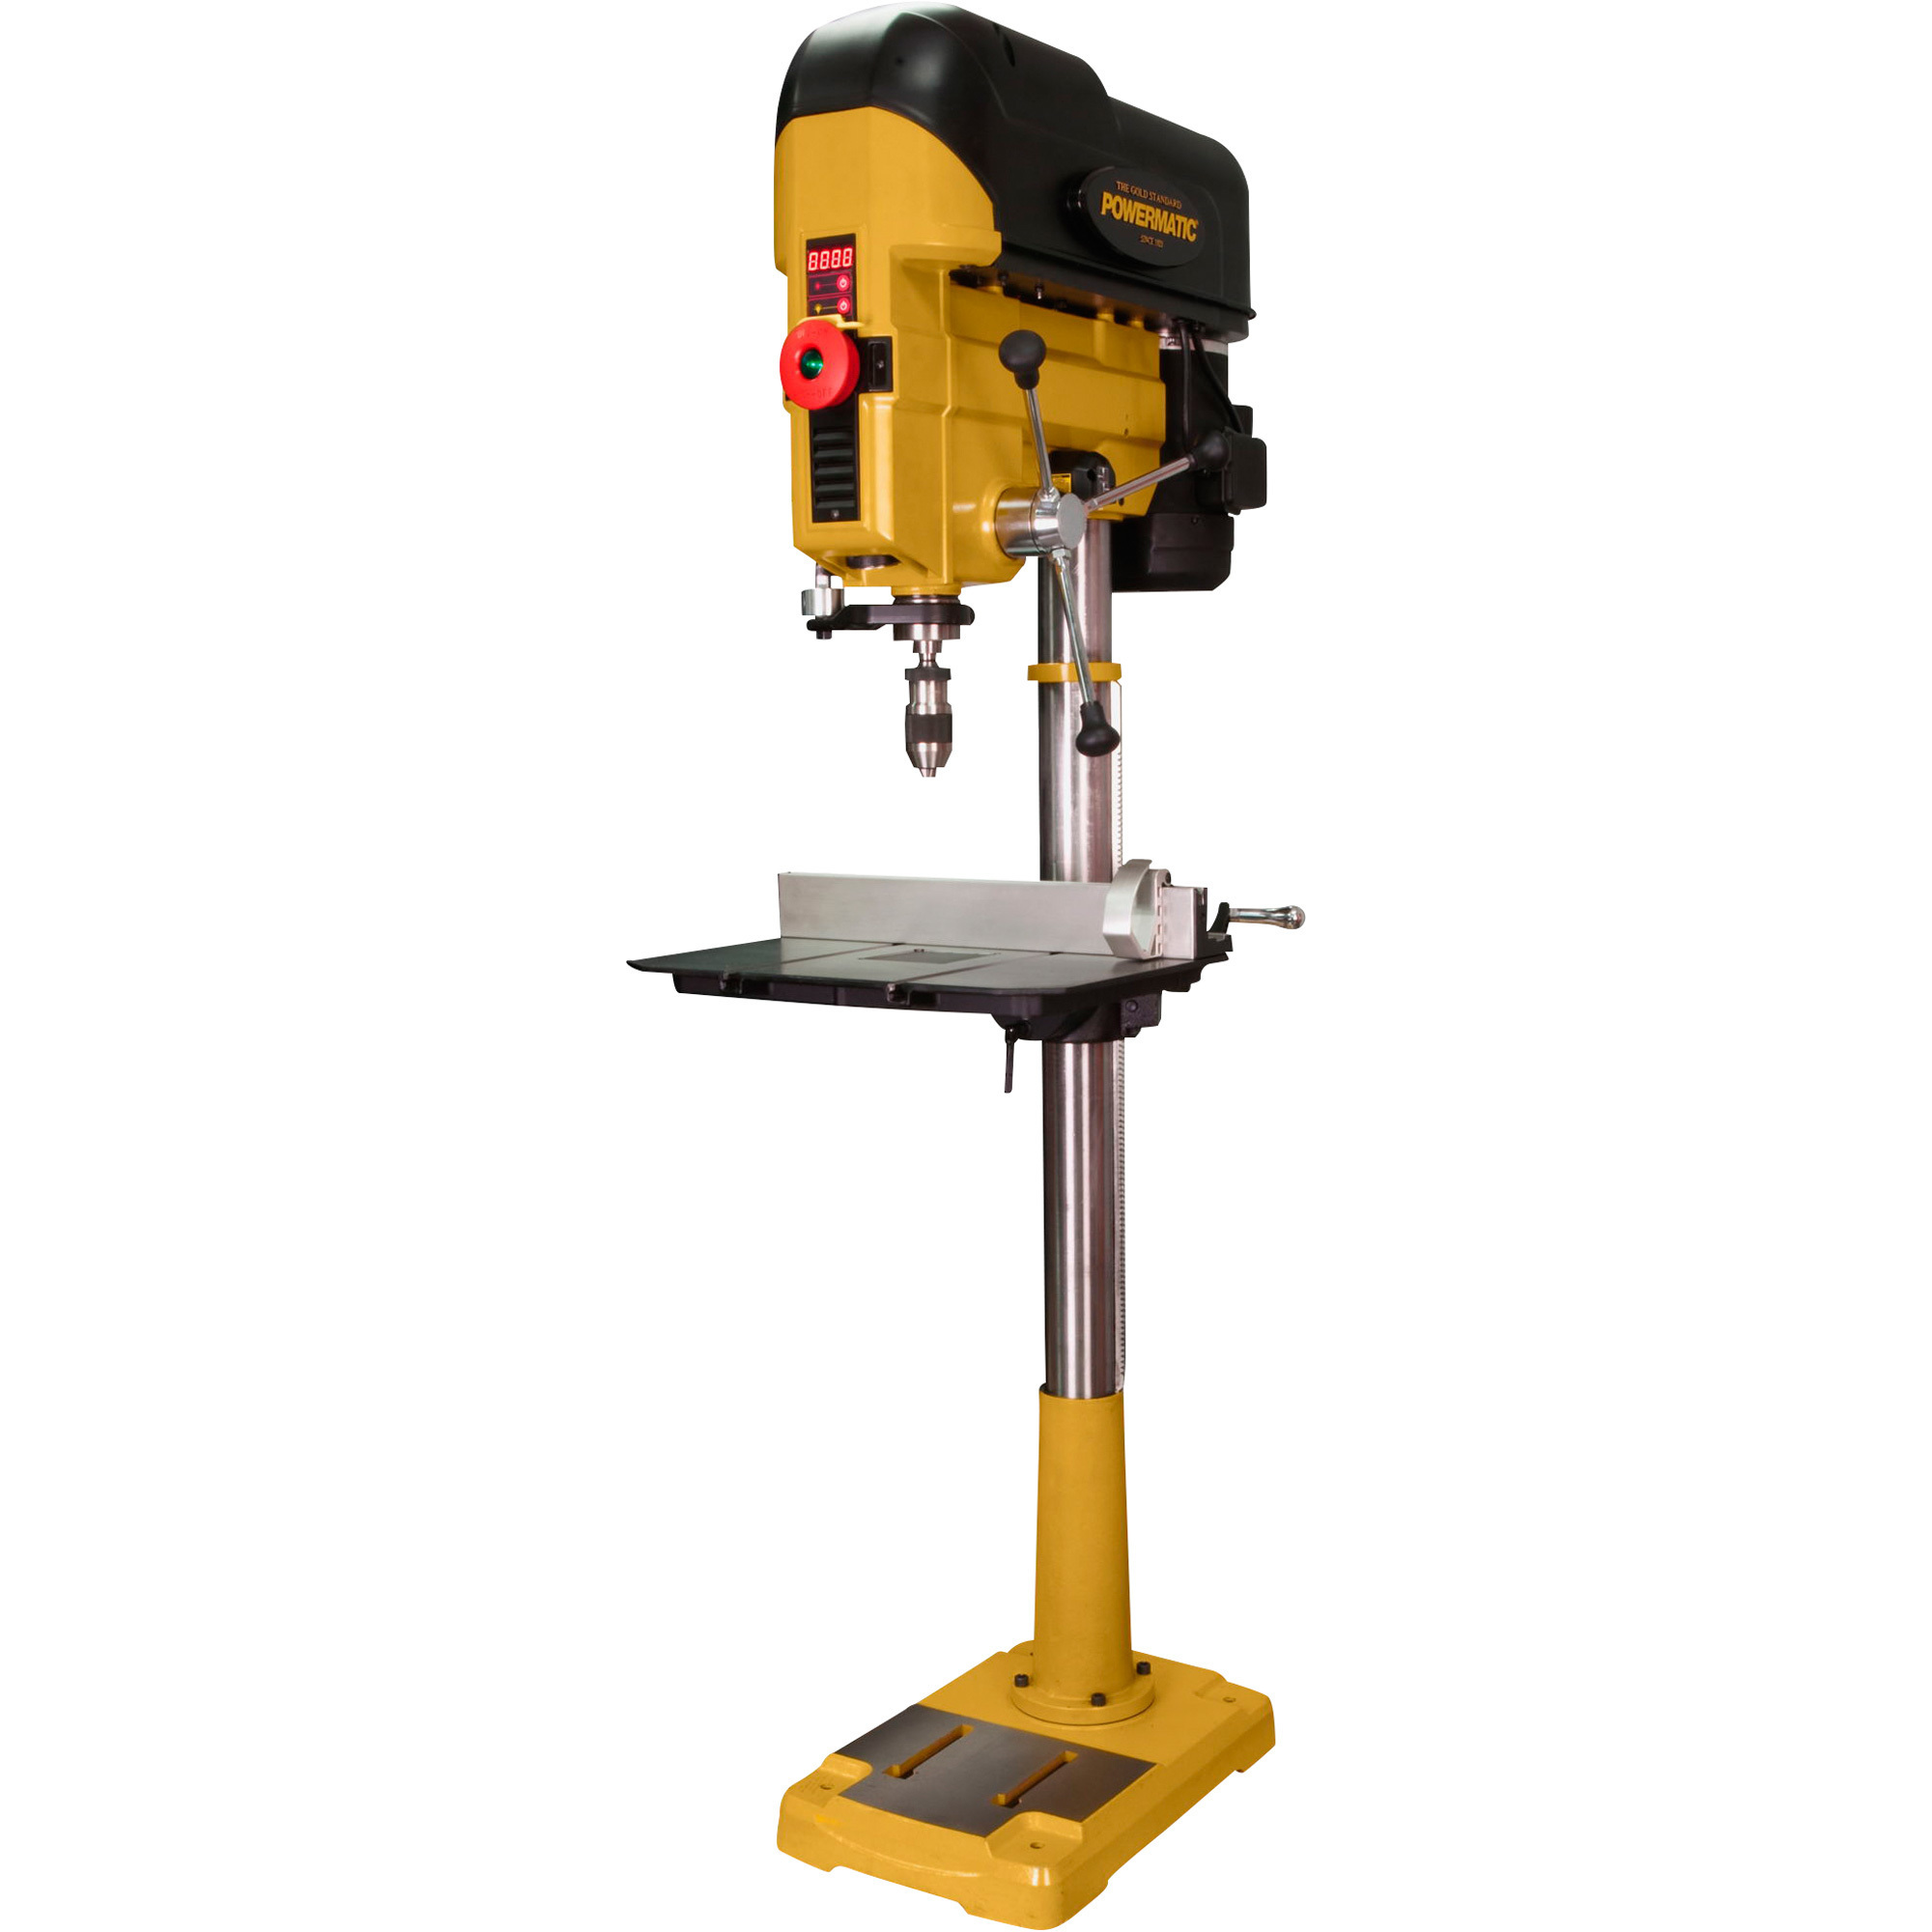 Powermatic Variable Speed Drill Press with Digital Readout, 5/8Inch, 1 HP, 1 PH, 115/230V, Model PM2800B